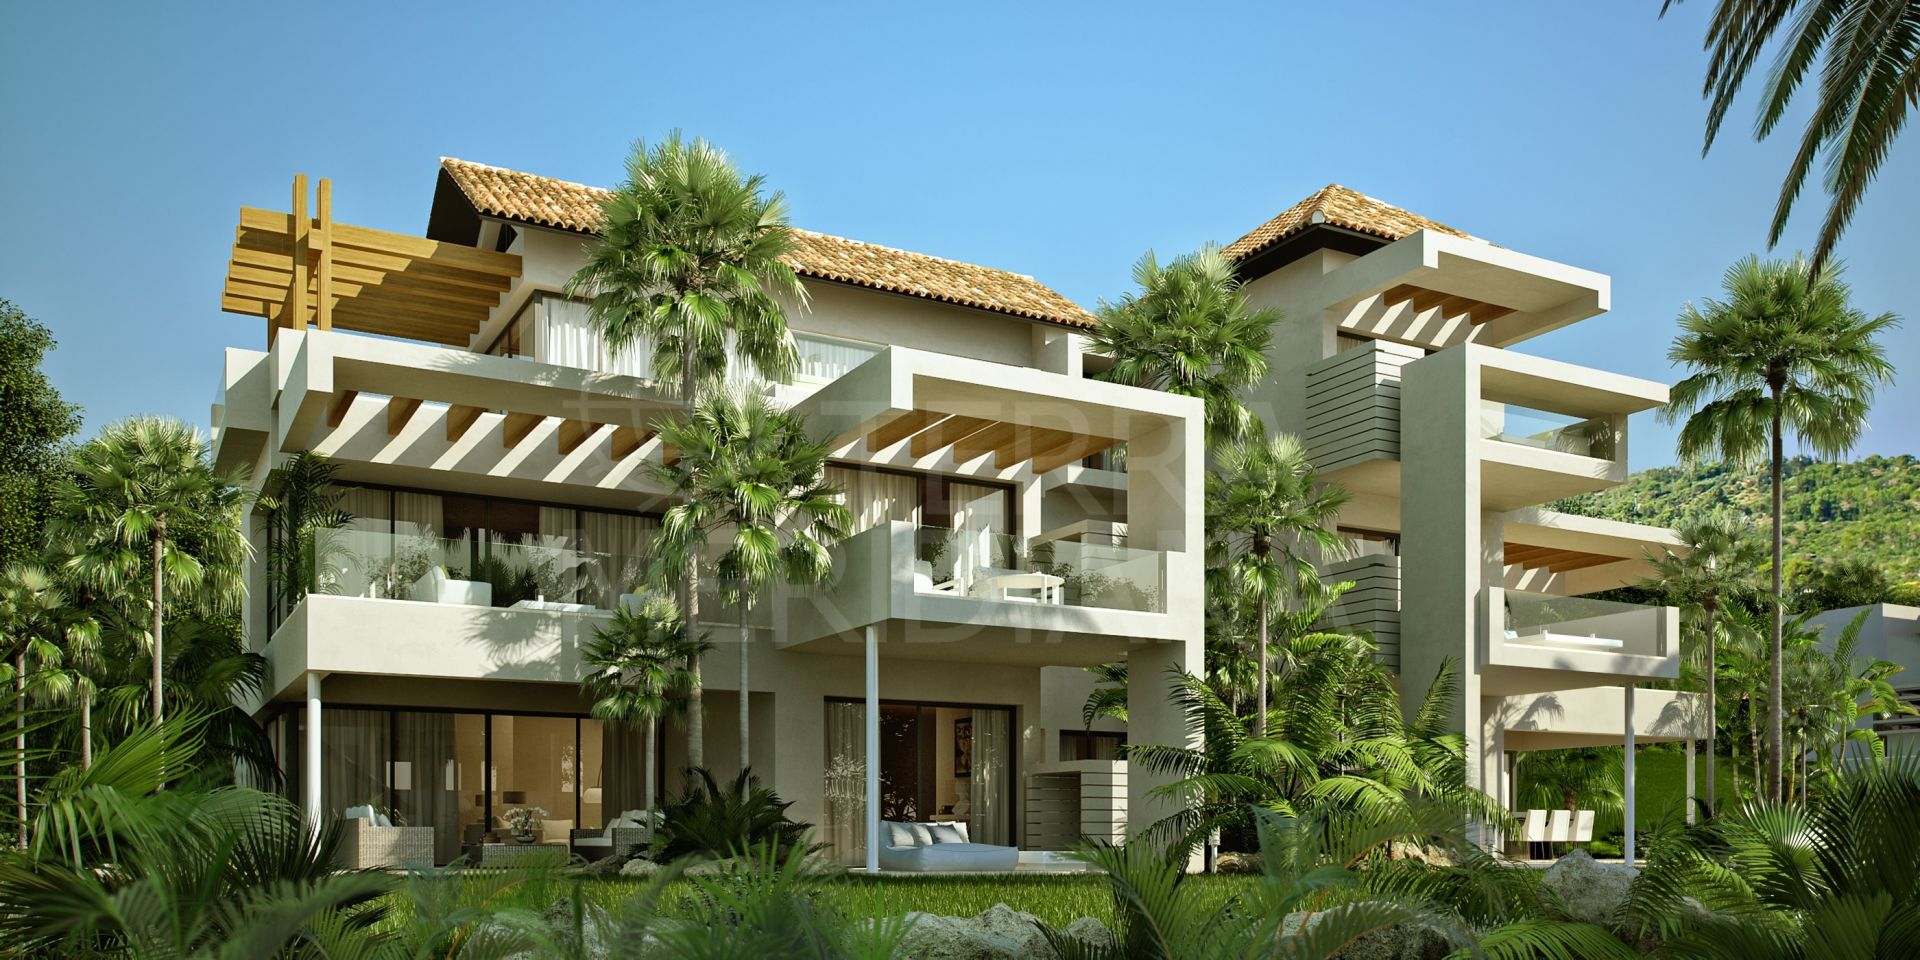 New luxury 3 and 4 bedroom apartments and penthouses for sale next to Marbella Club Golf Resort